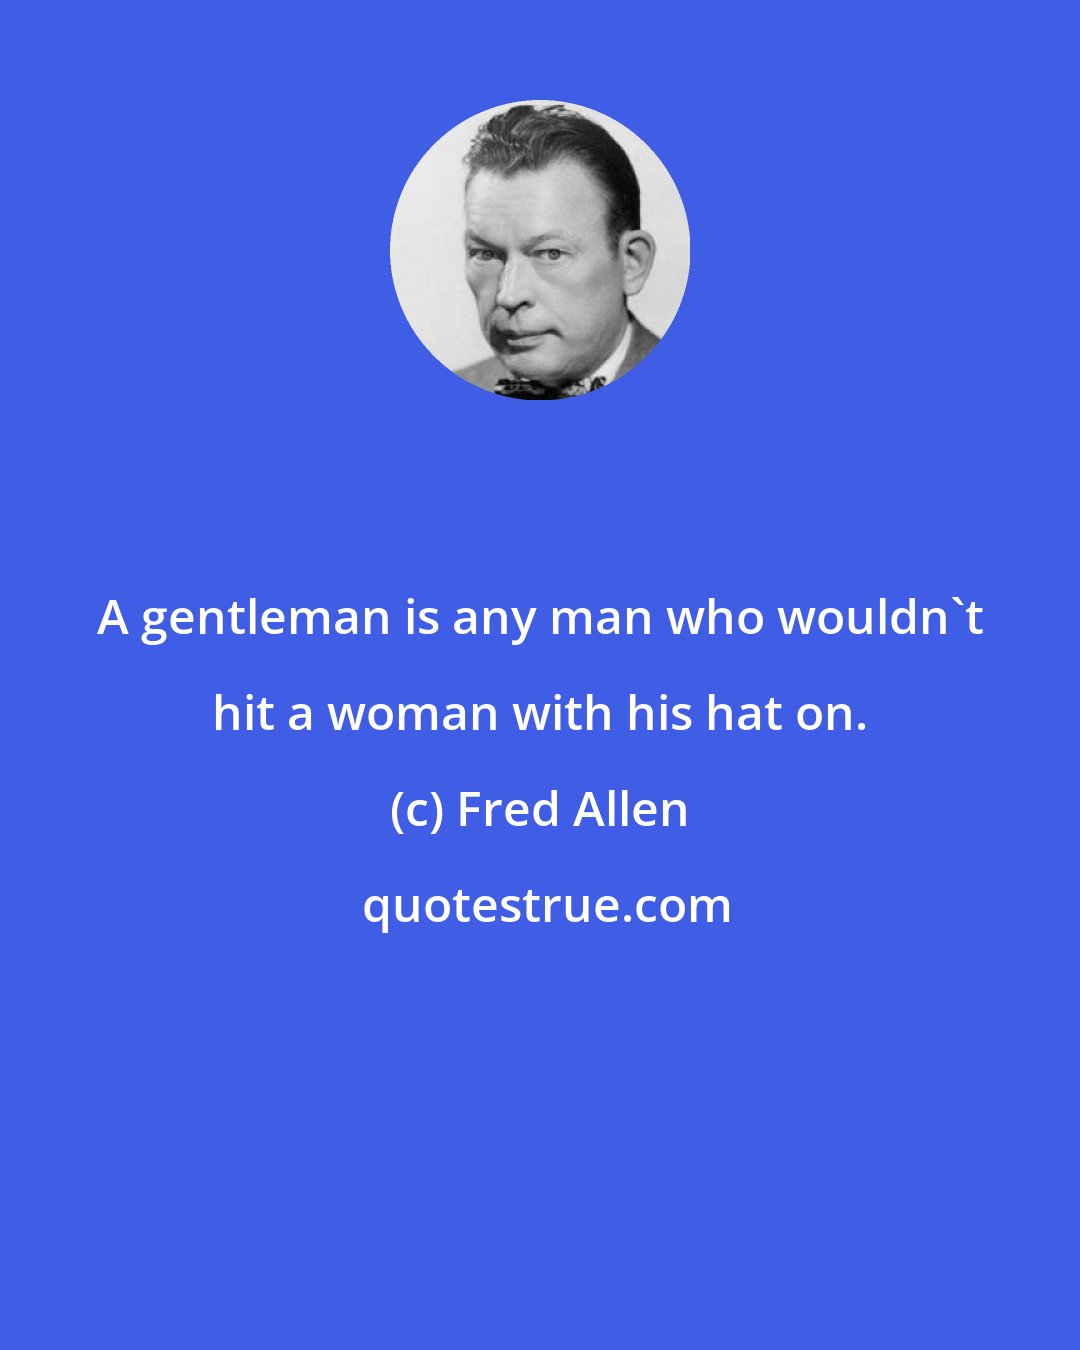 Fred Allen: A gentleman is any man who wouldn't hit a woman with his hat on.